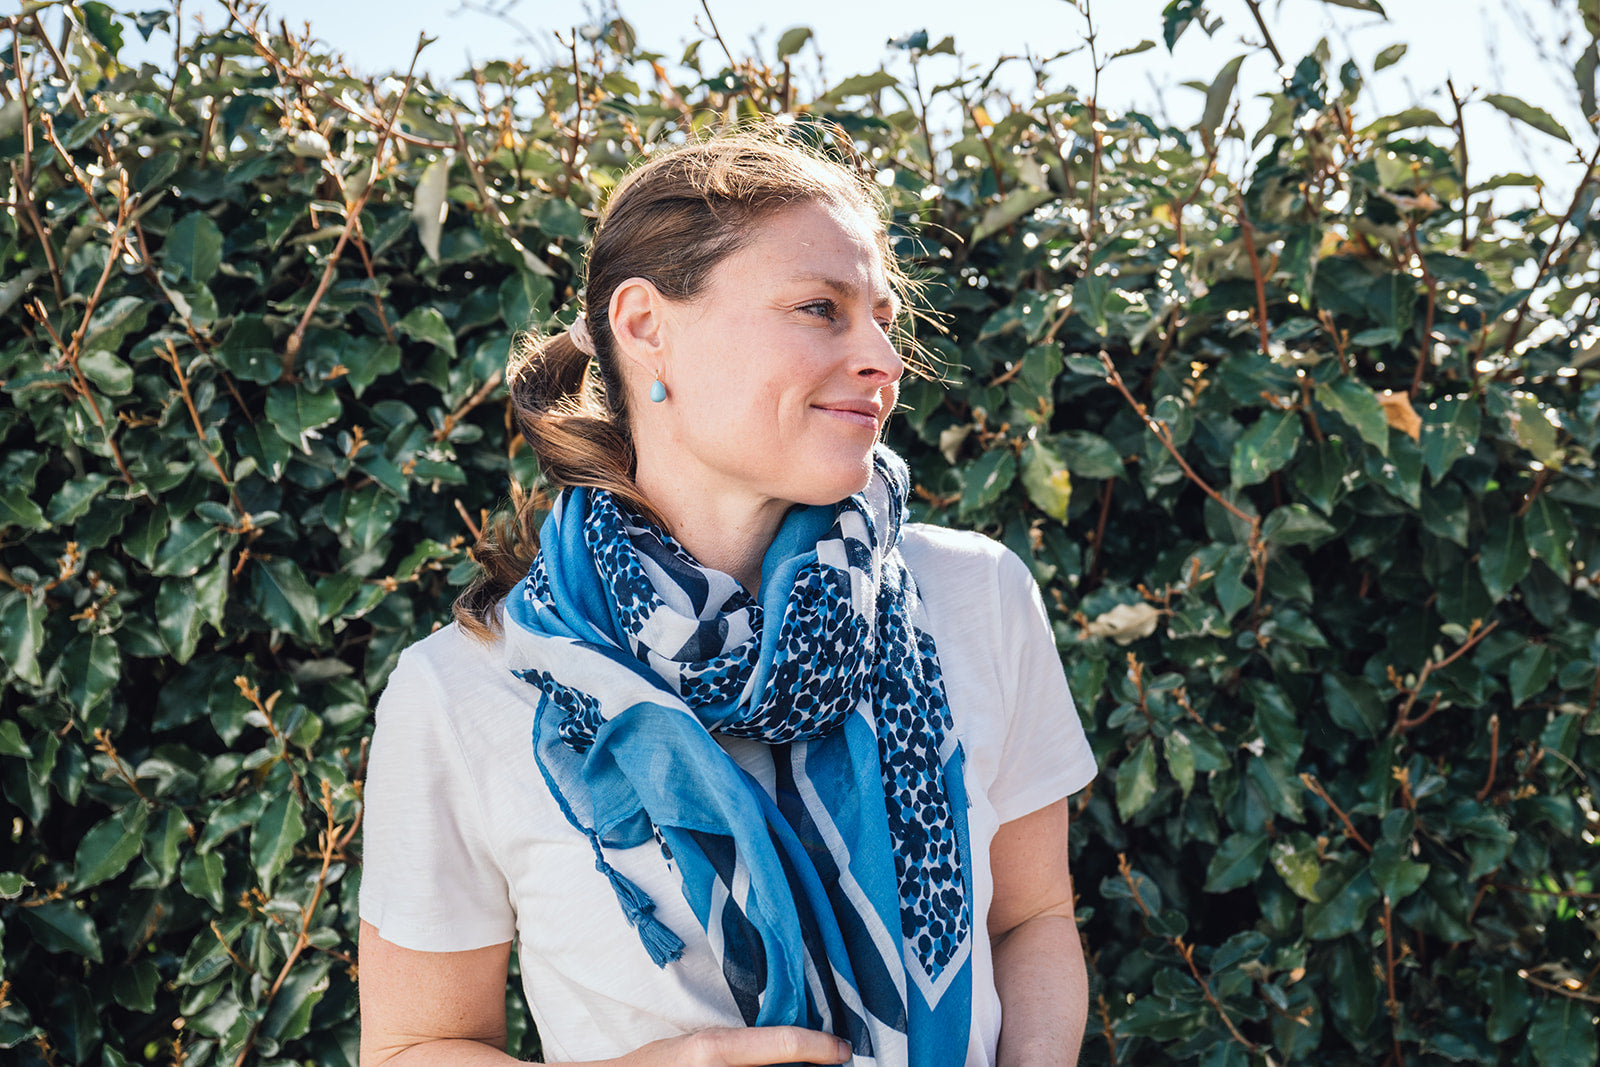 Introducing our geometric confetti spot scarf – the lightweight, year-round essential that's all about fun and fashion! Each corner is adorned with delightful tassels for added texture. Featuring a fantastic palette of navy, denim blues, and white, this scarf is as versatile as your favourite pair of jeans.